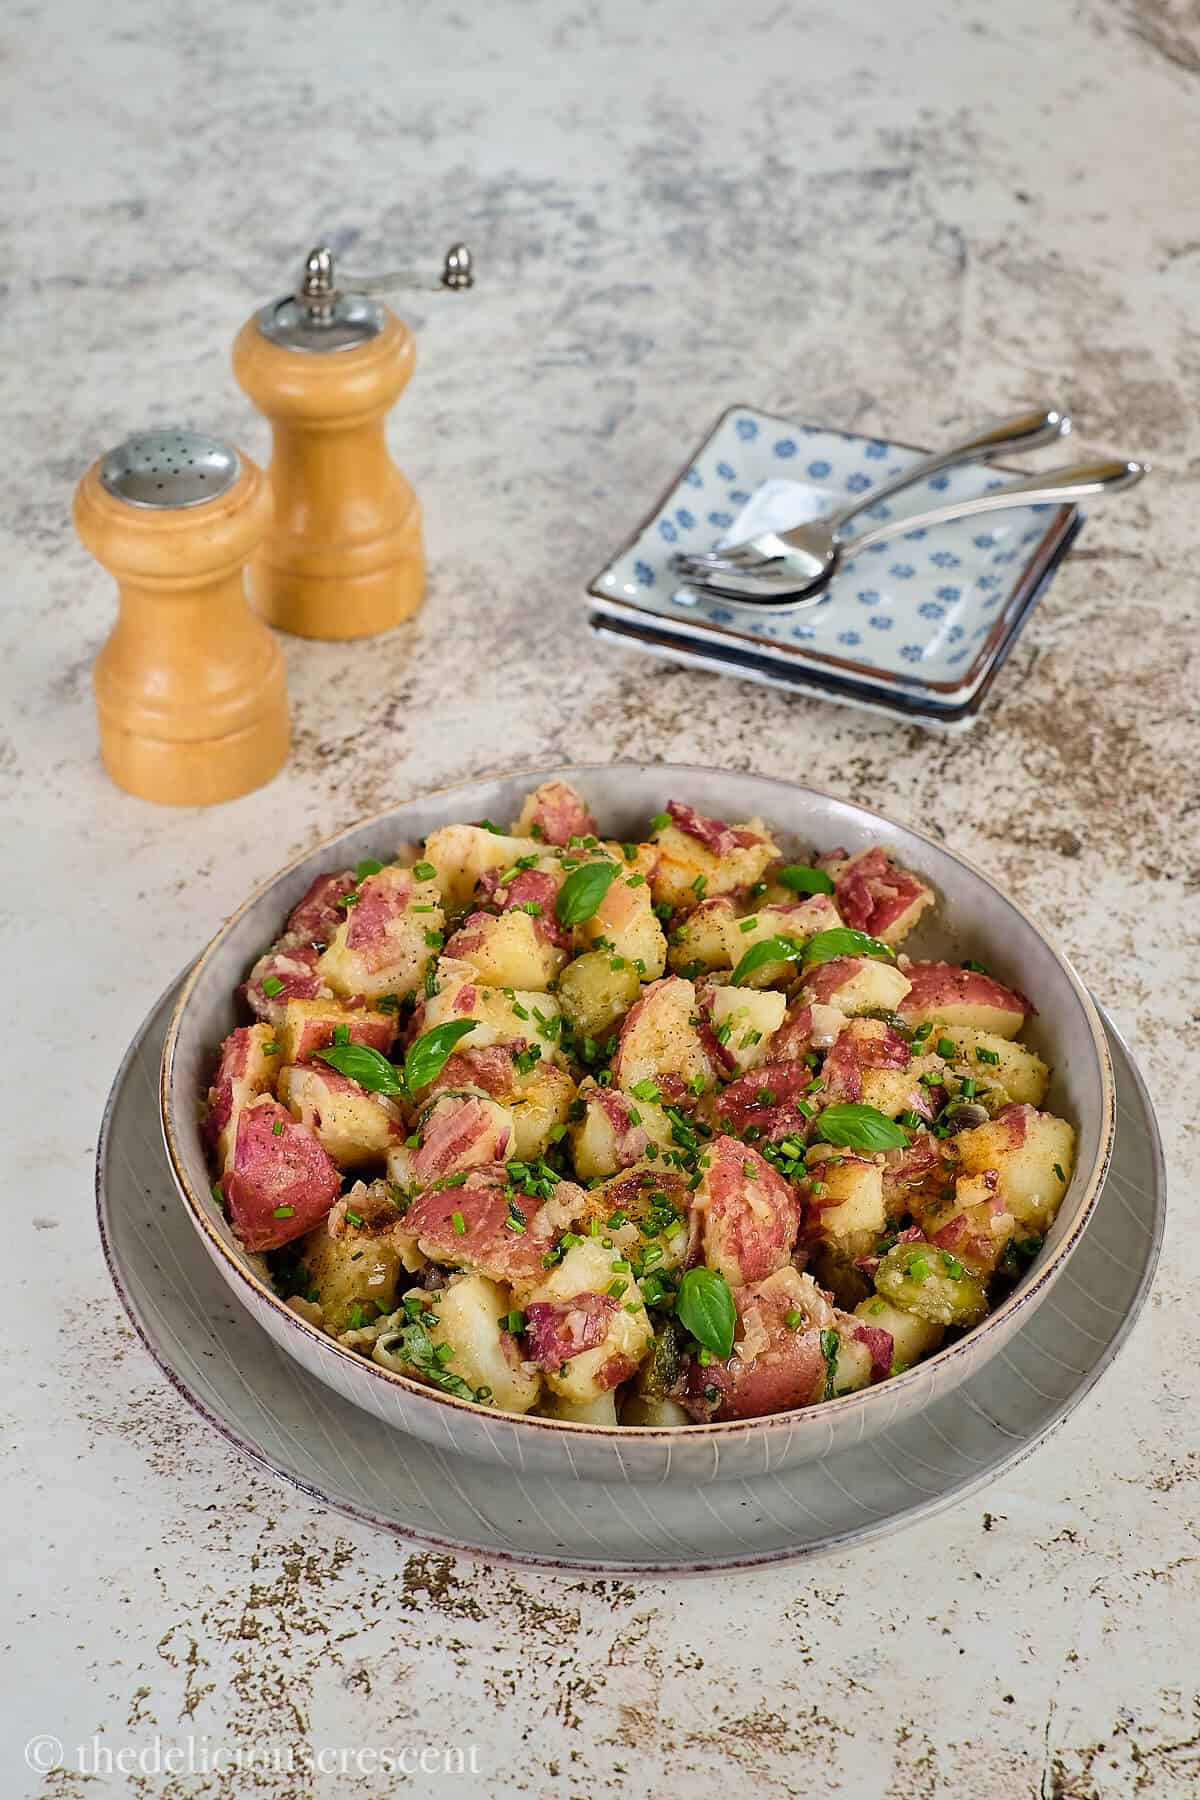 Delicious salad made with potatoes and served in a grey bowl.